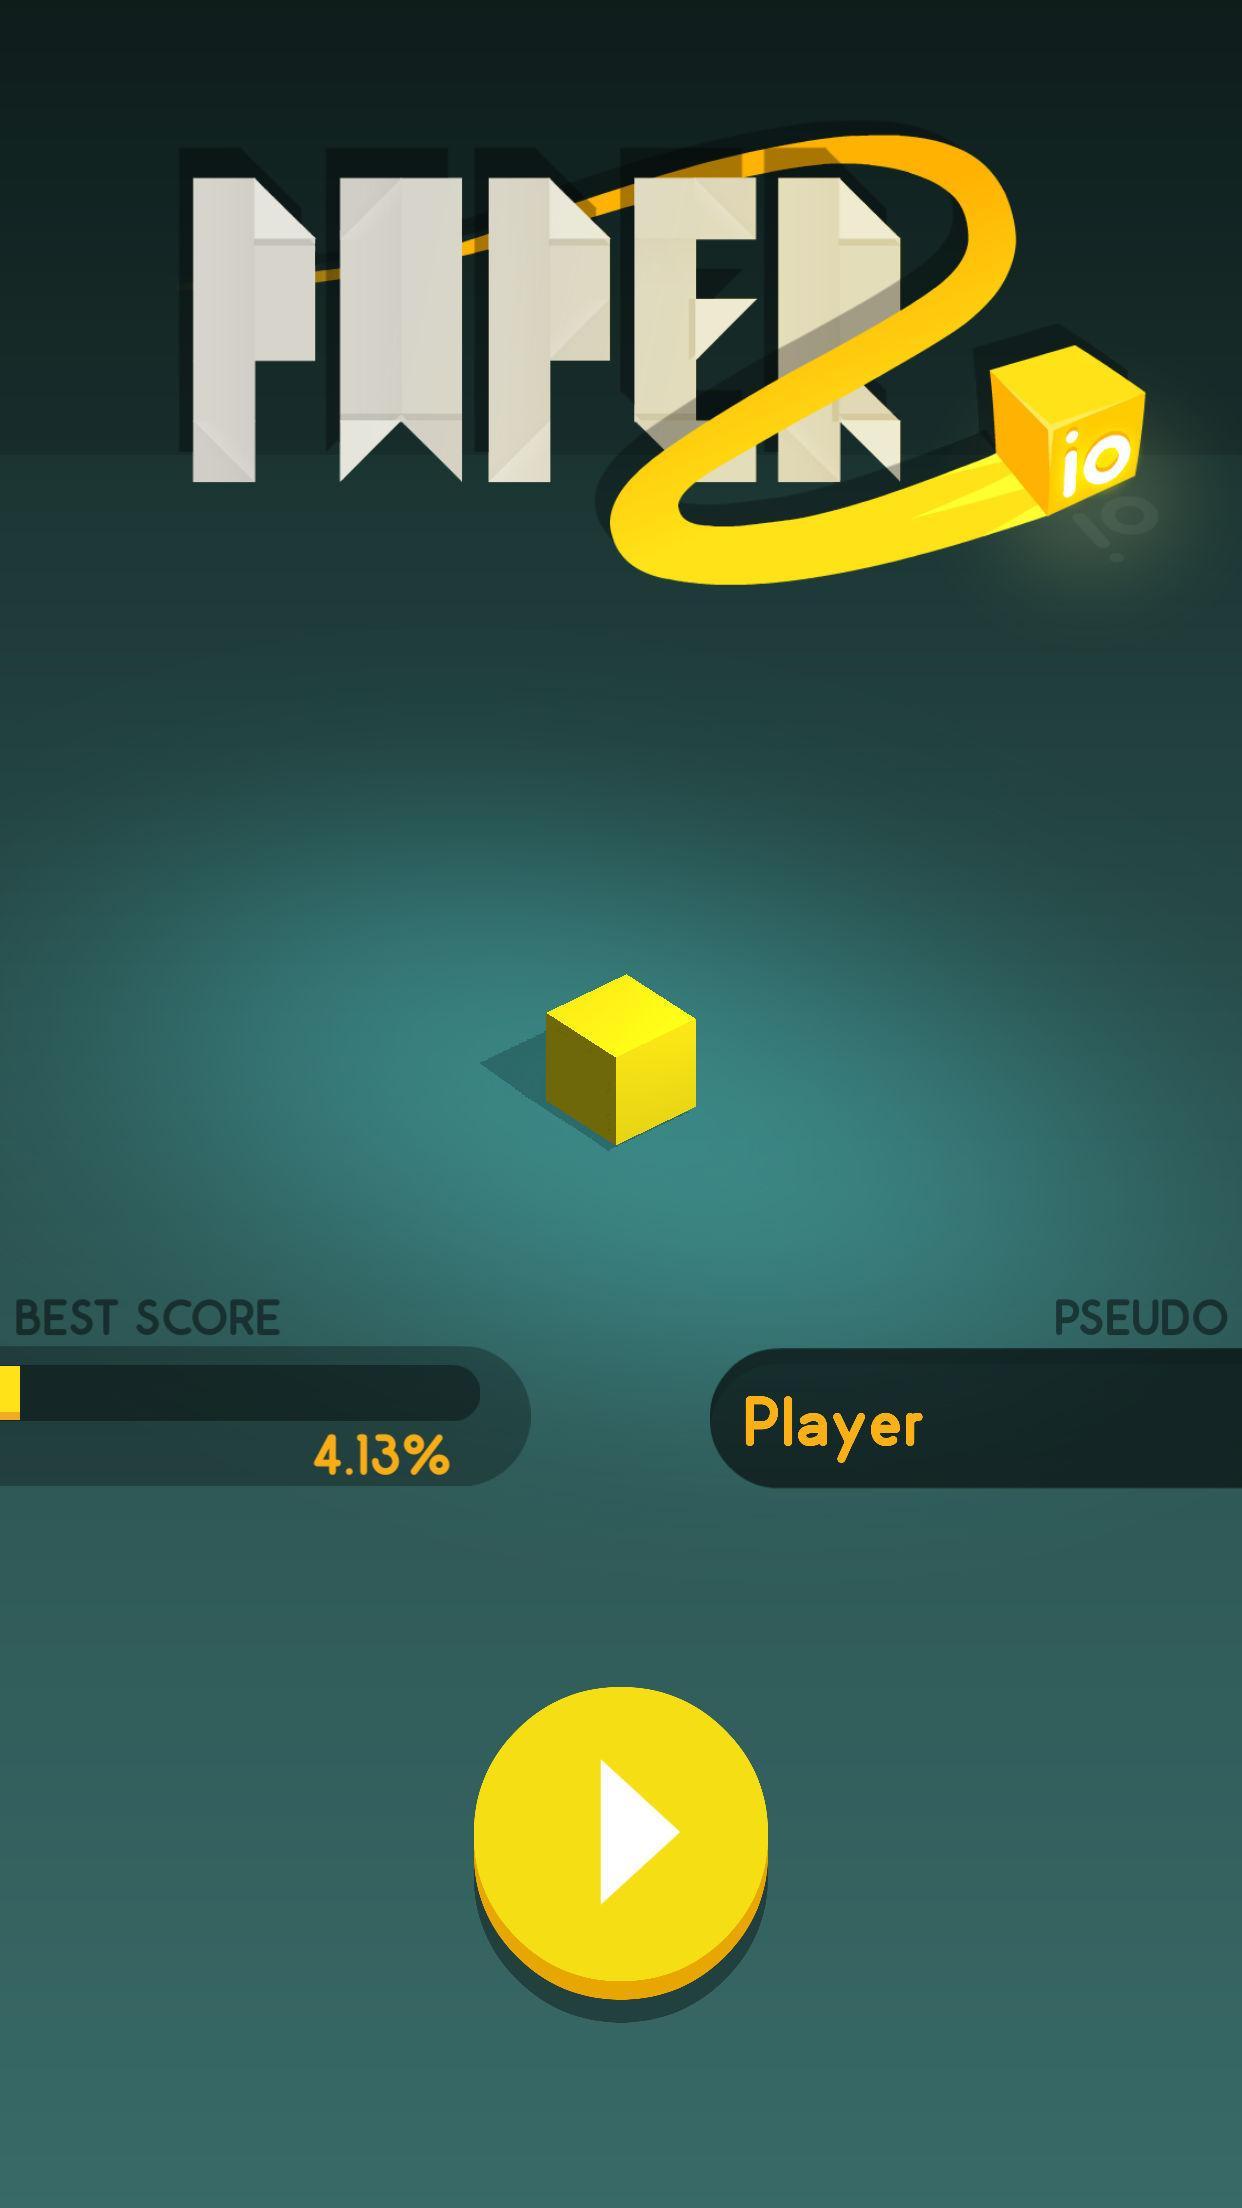 Paper.io 2 for Android - APK Download